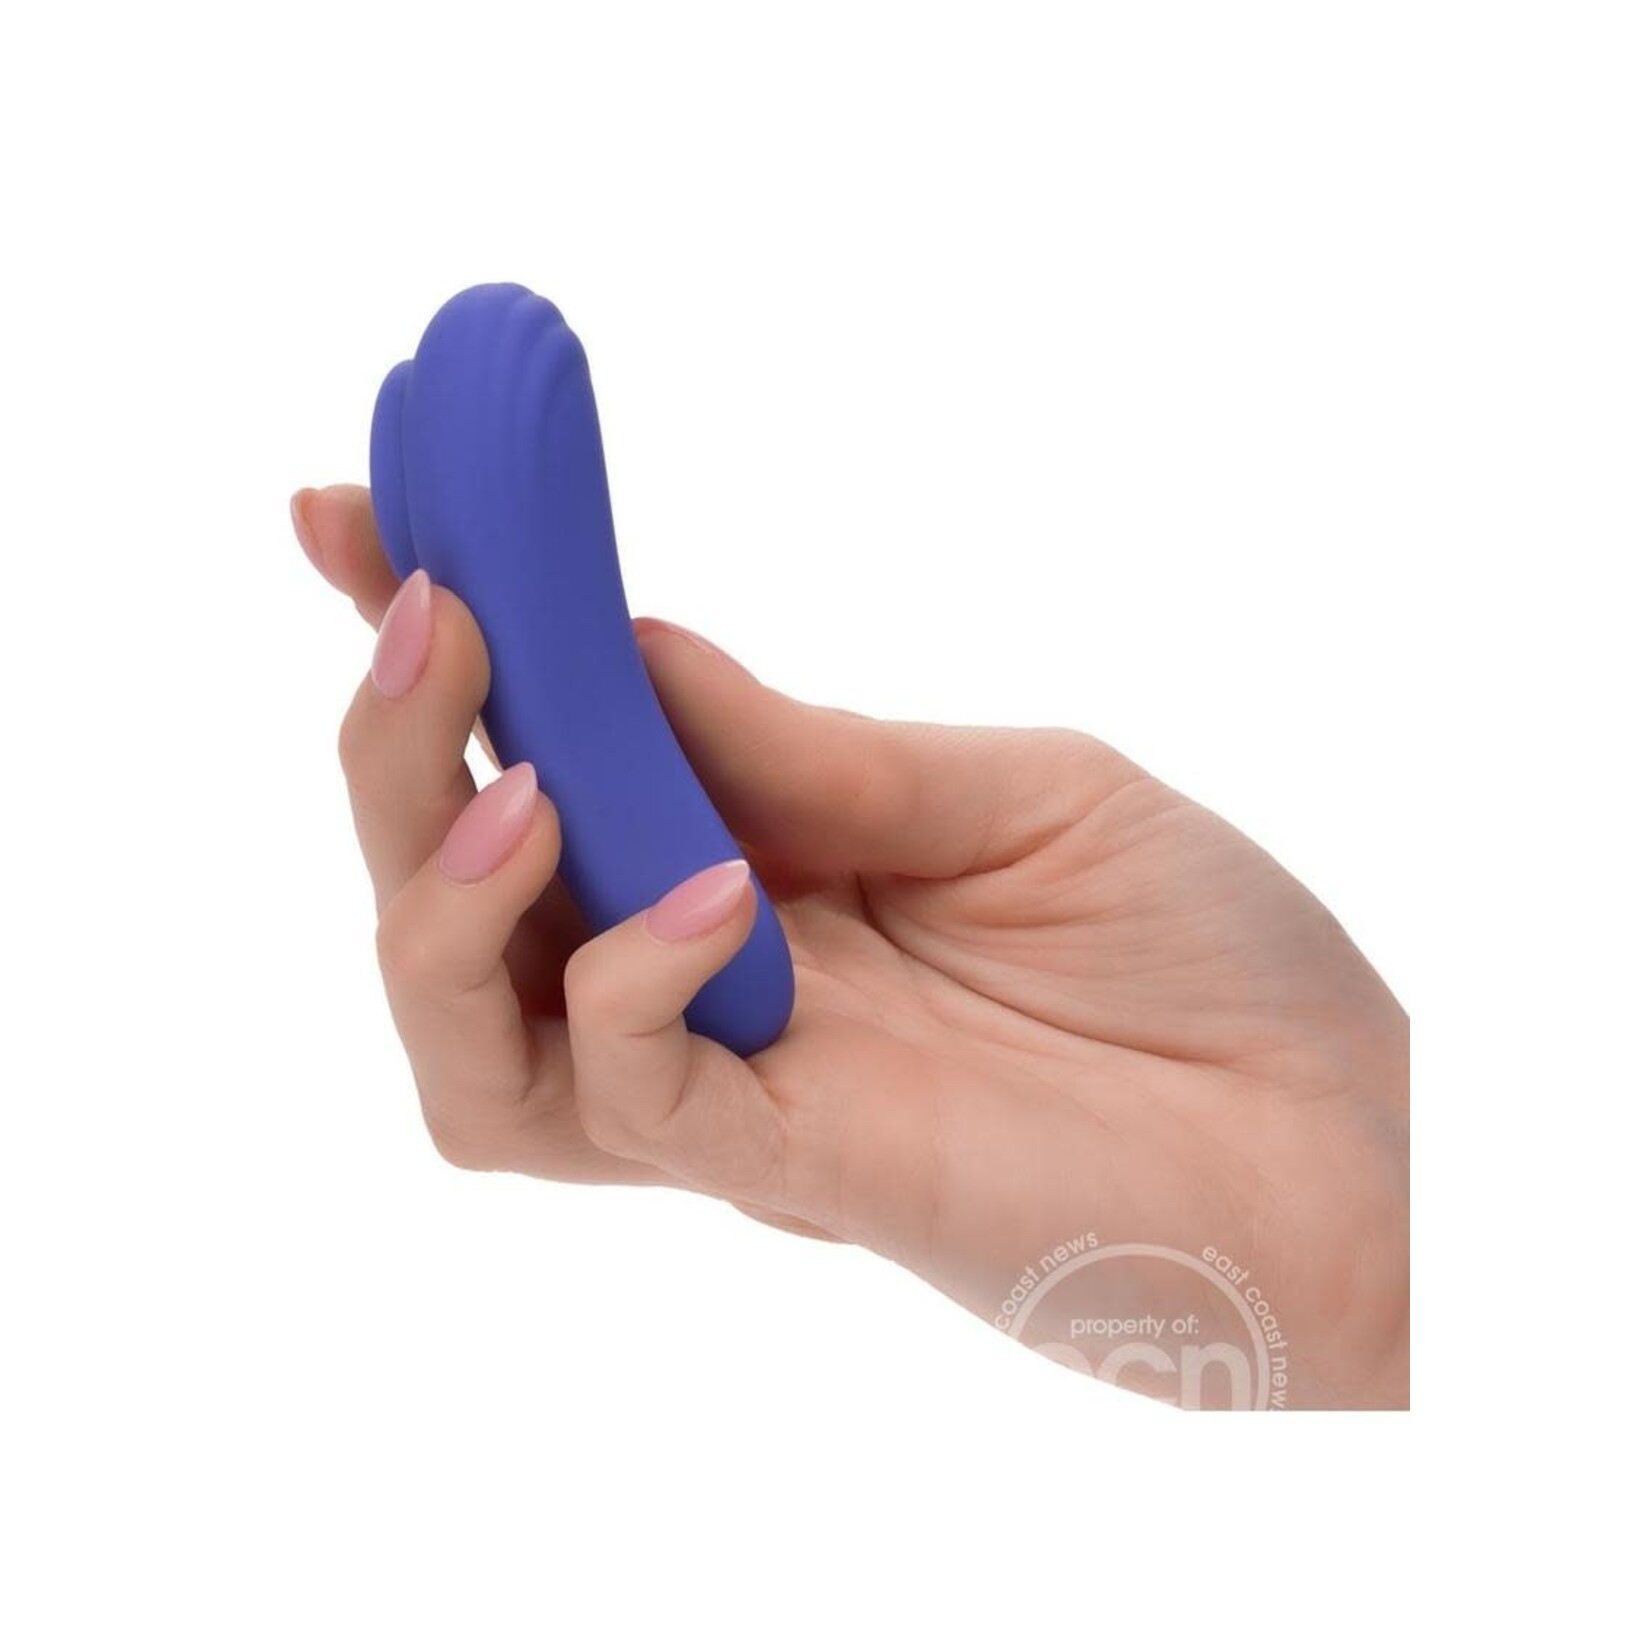 CalExotics Connect Panty Teaser Rechargeable Silicone App Compatible Vibrator with Remote - Purple